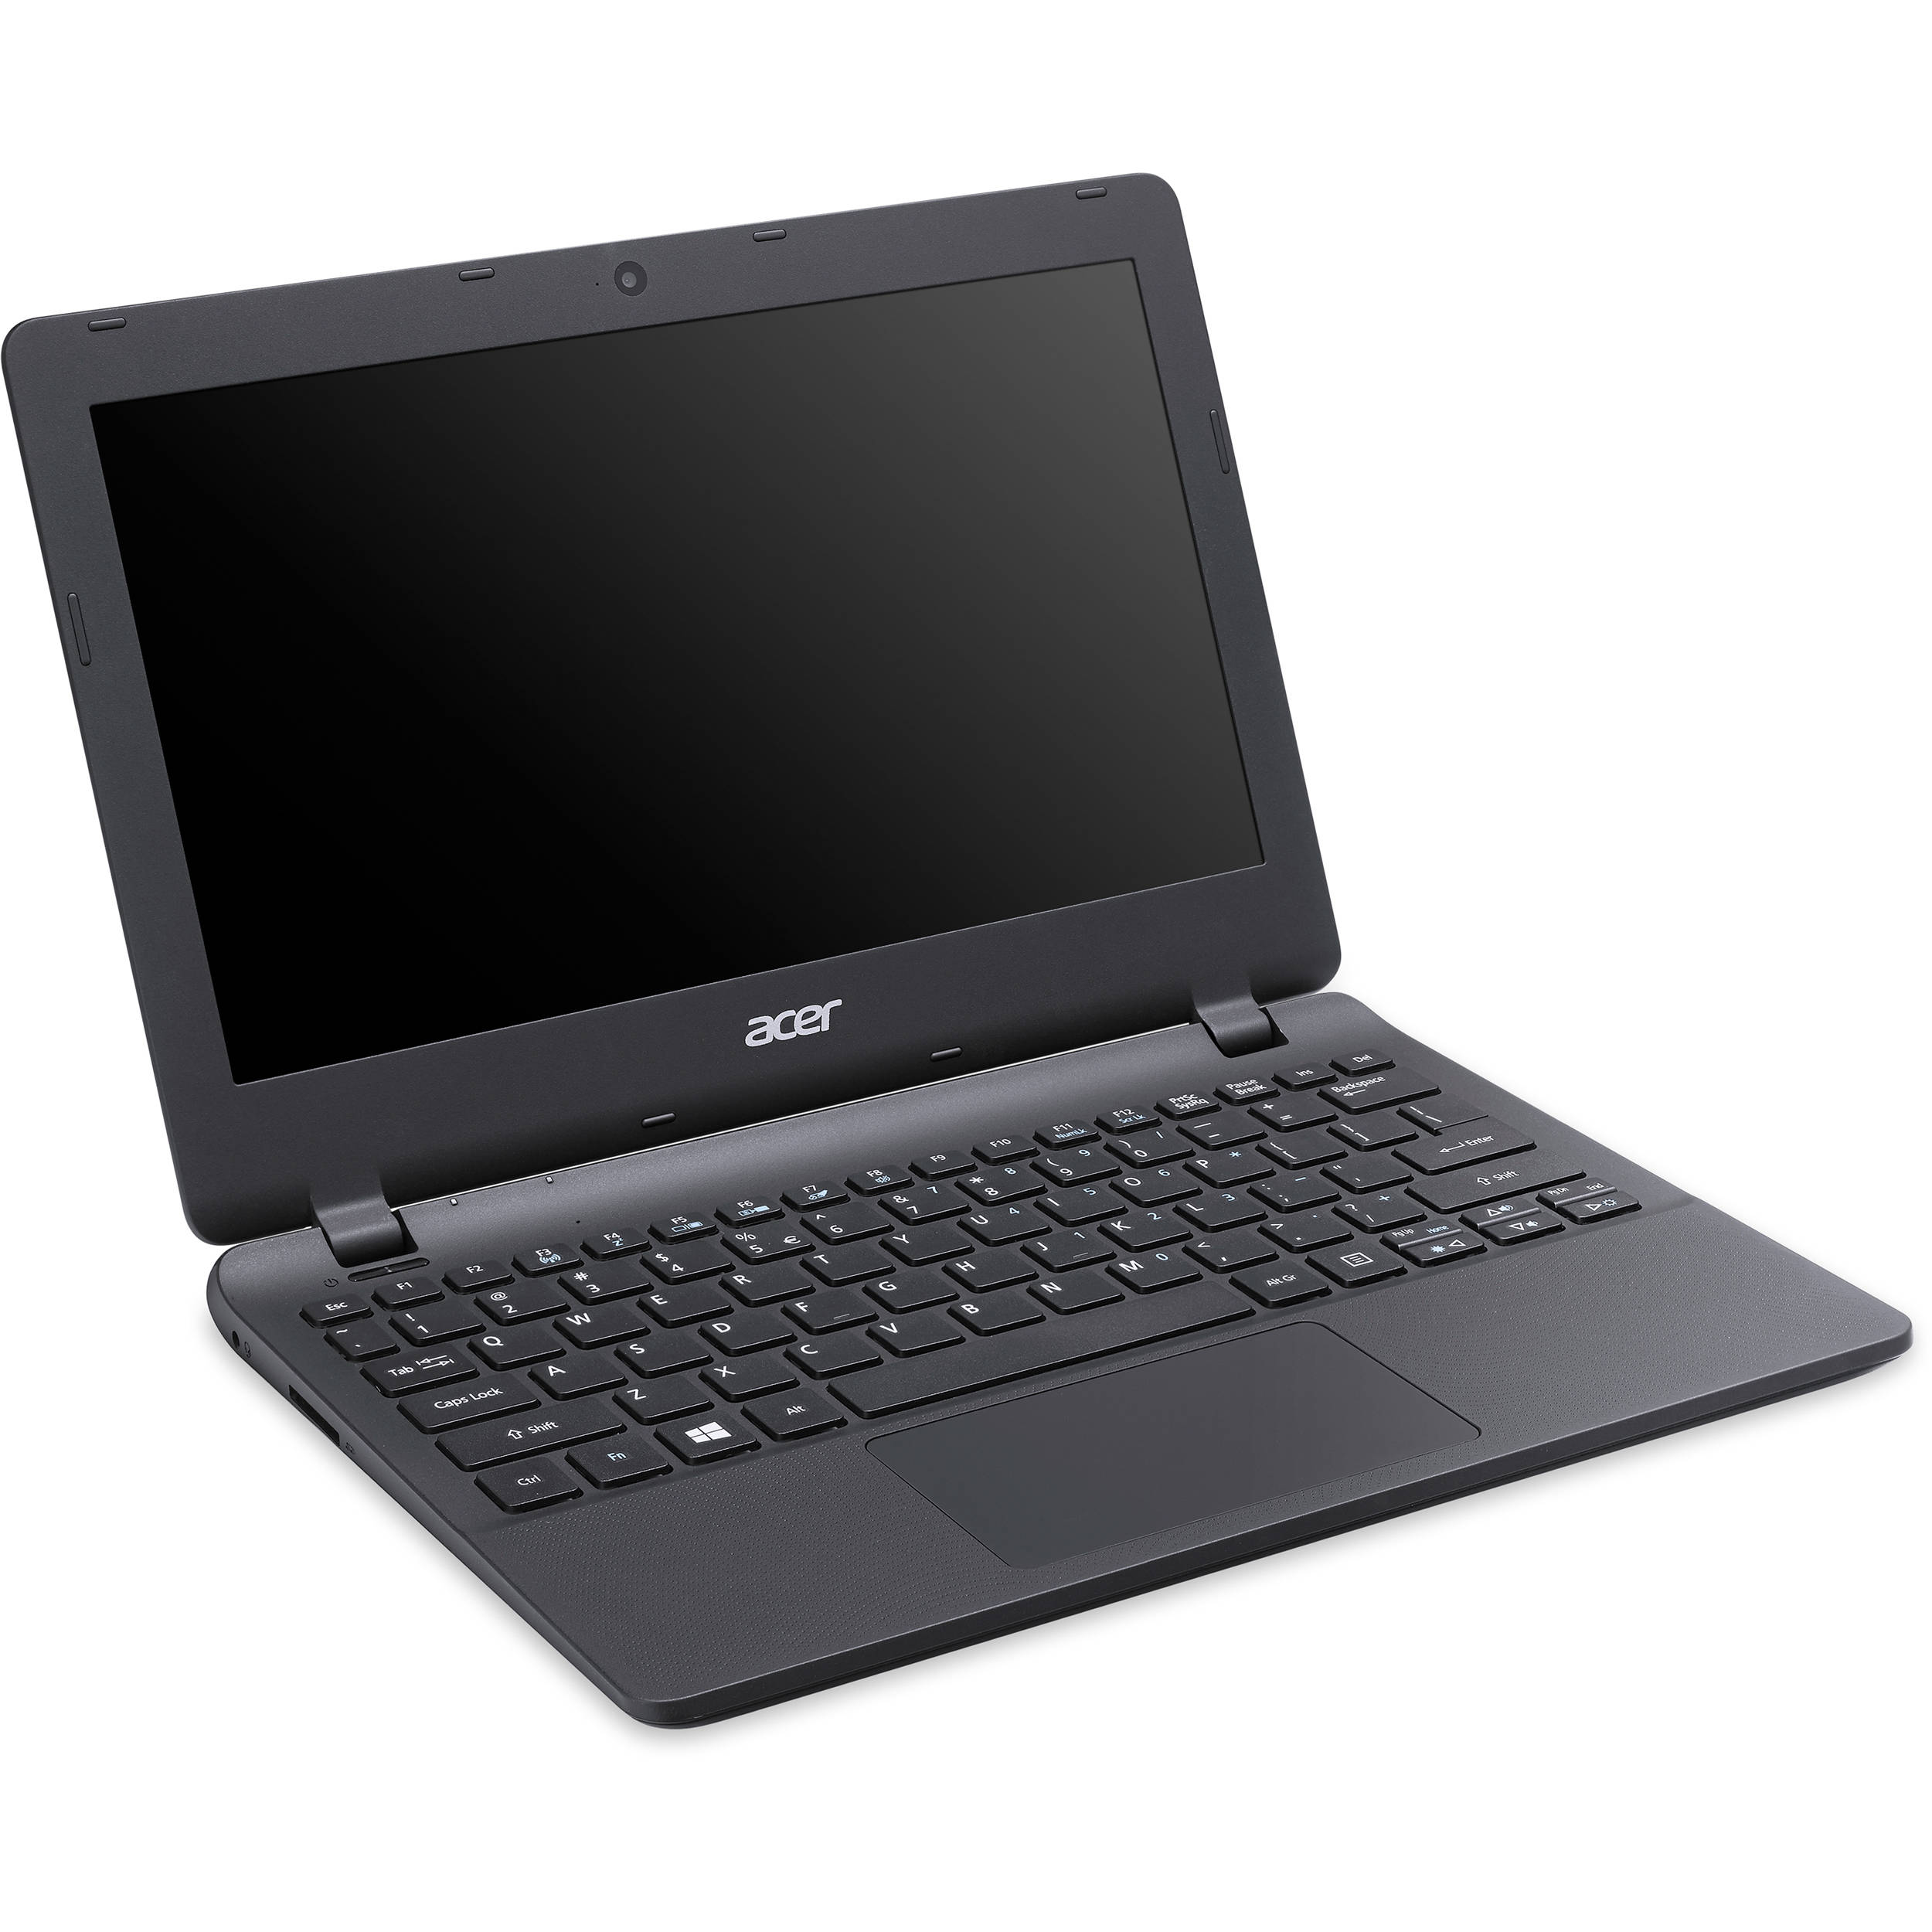 acer computers